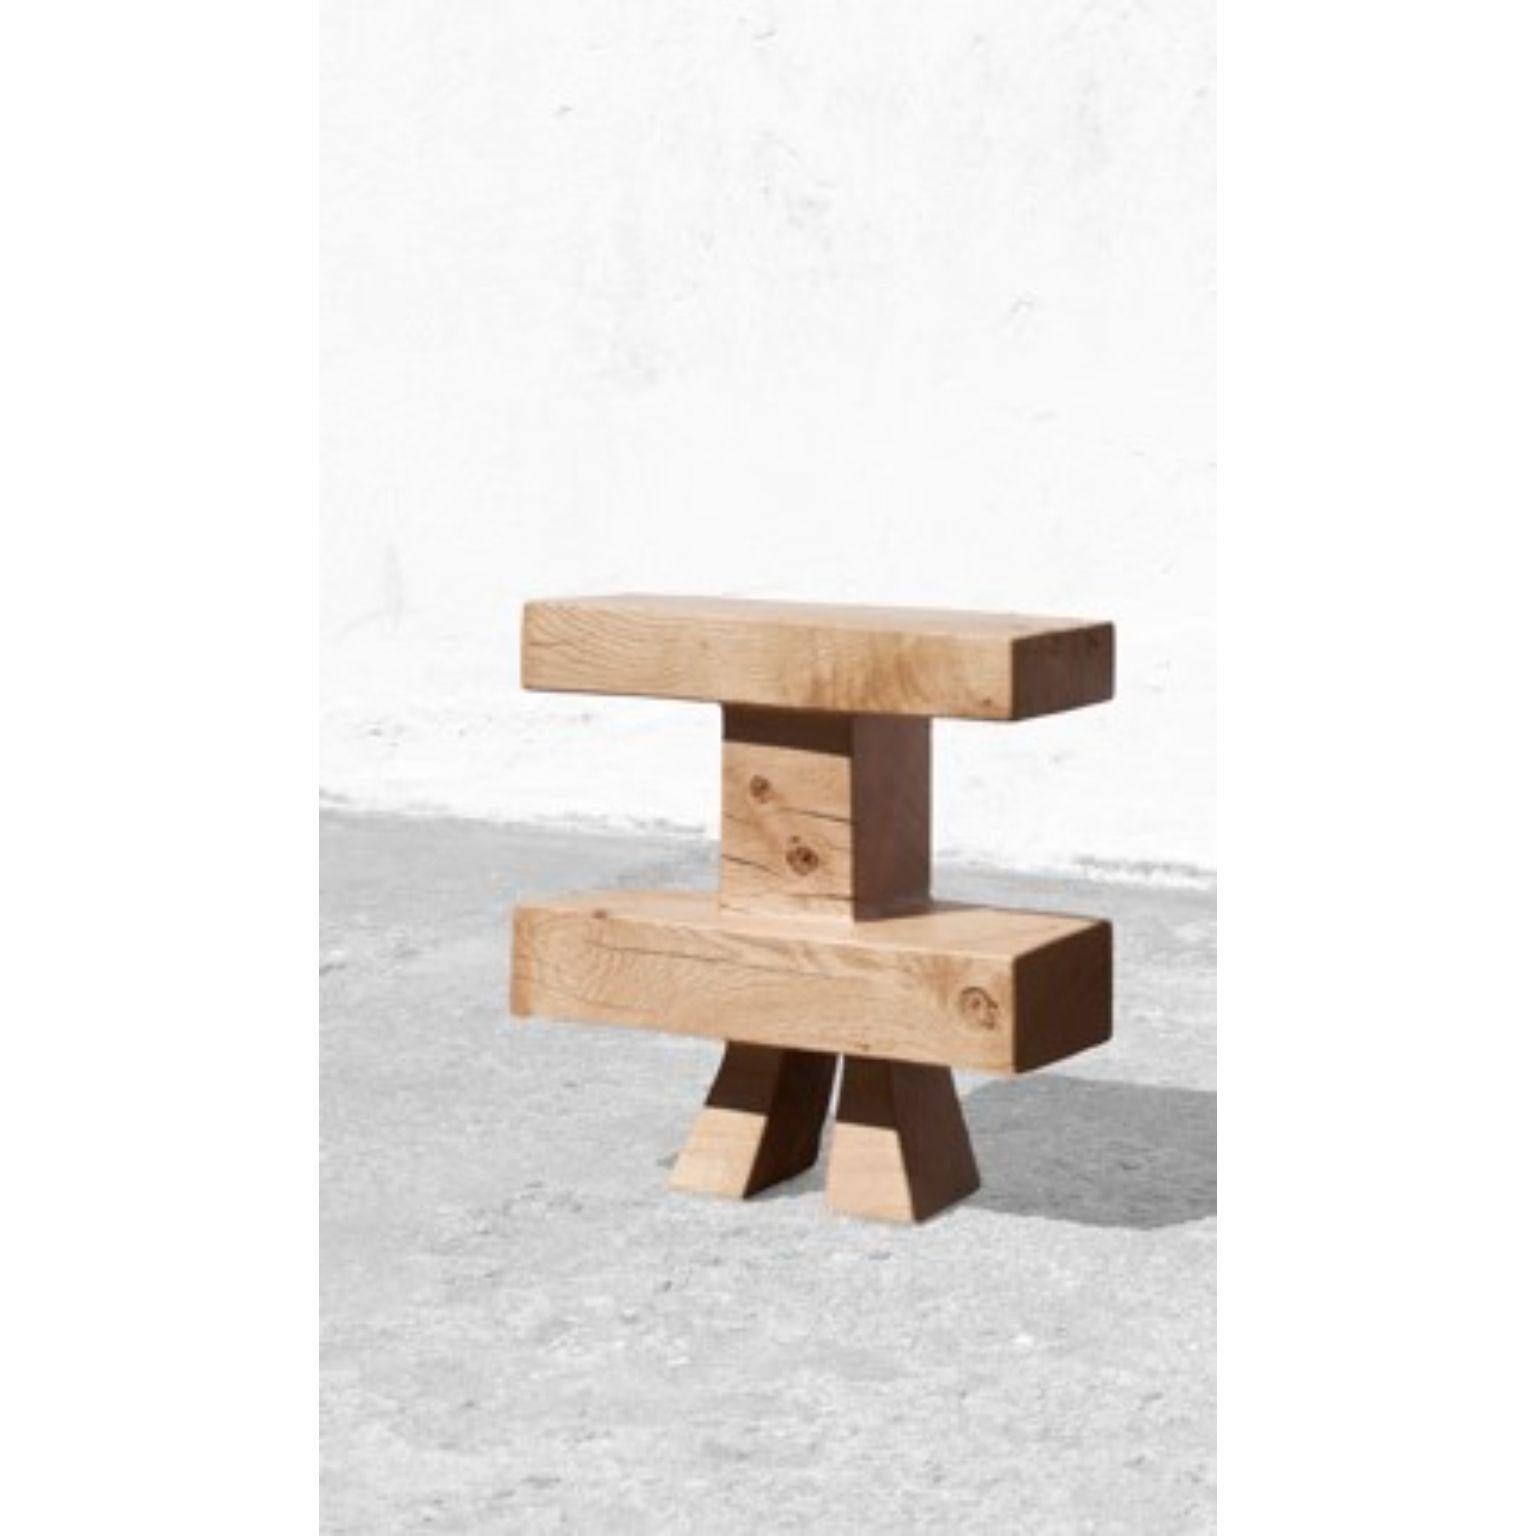 Sculpted Oak Stool by Jörg PietschmannAsh
Dimensions: H 45 x W 38 x D 16,5 cm.

Polished oil finish.

In Pietschmann’s sculptures, trees that for centuries were part of a landscape and founded in primordial forces tell stories inscribed in the